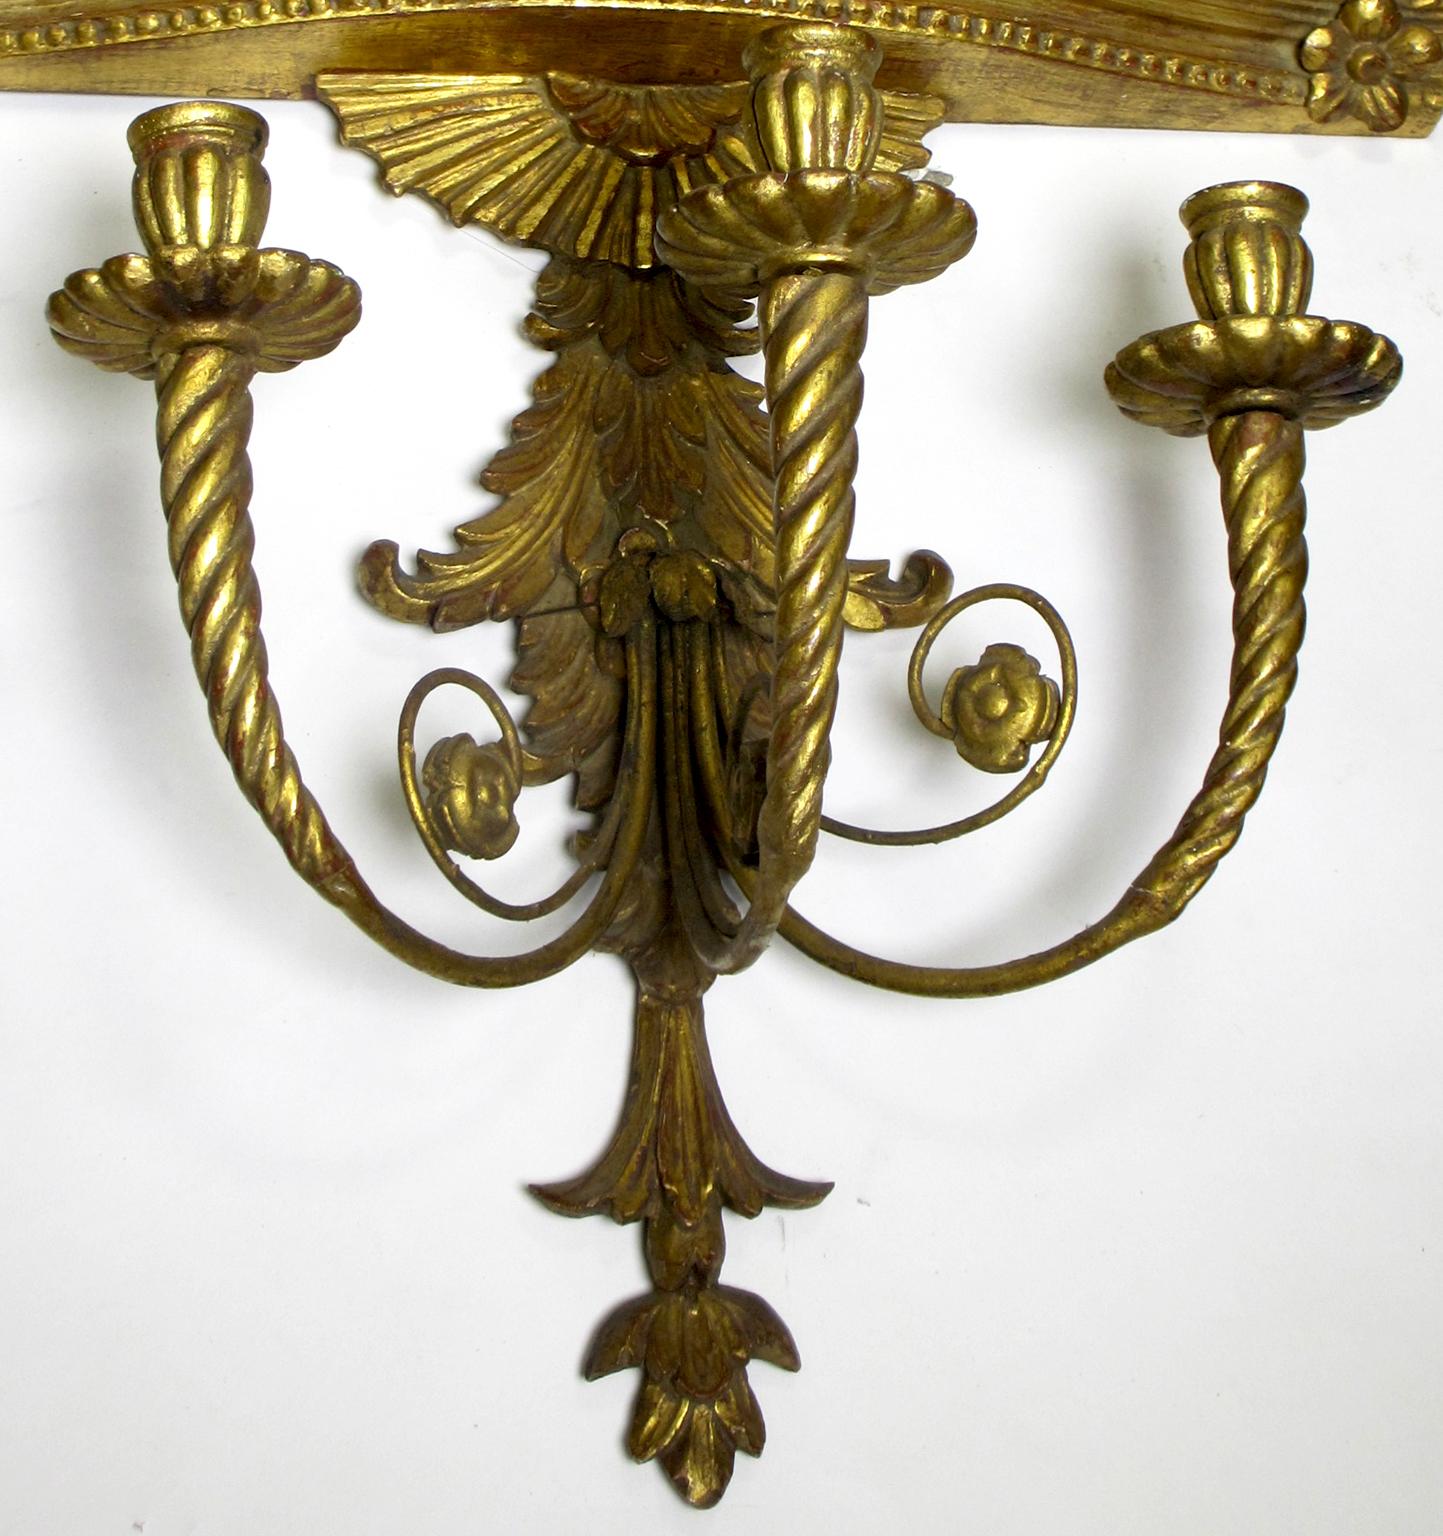 Gesso French 19th Century Louis XVI Style Giltwood Carved Sconce Mirror and Candelabra For Sale